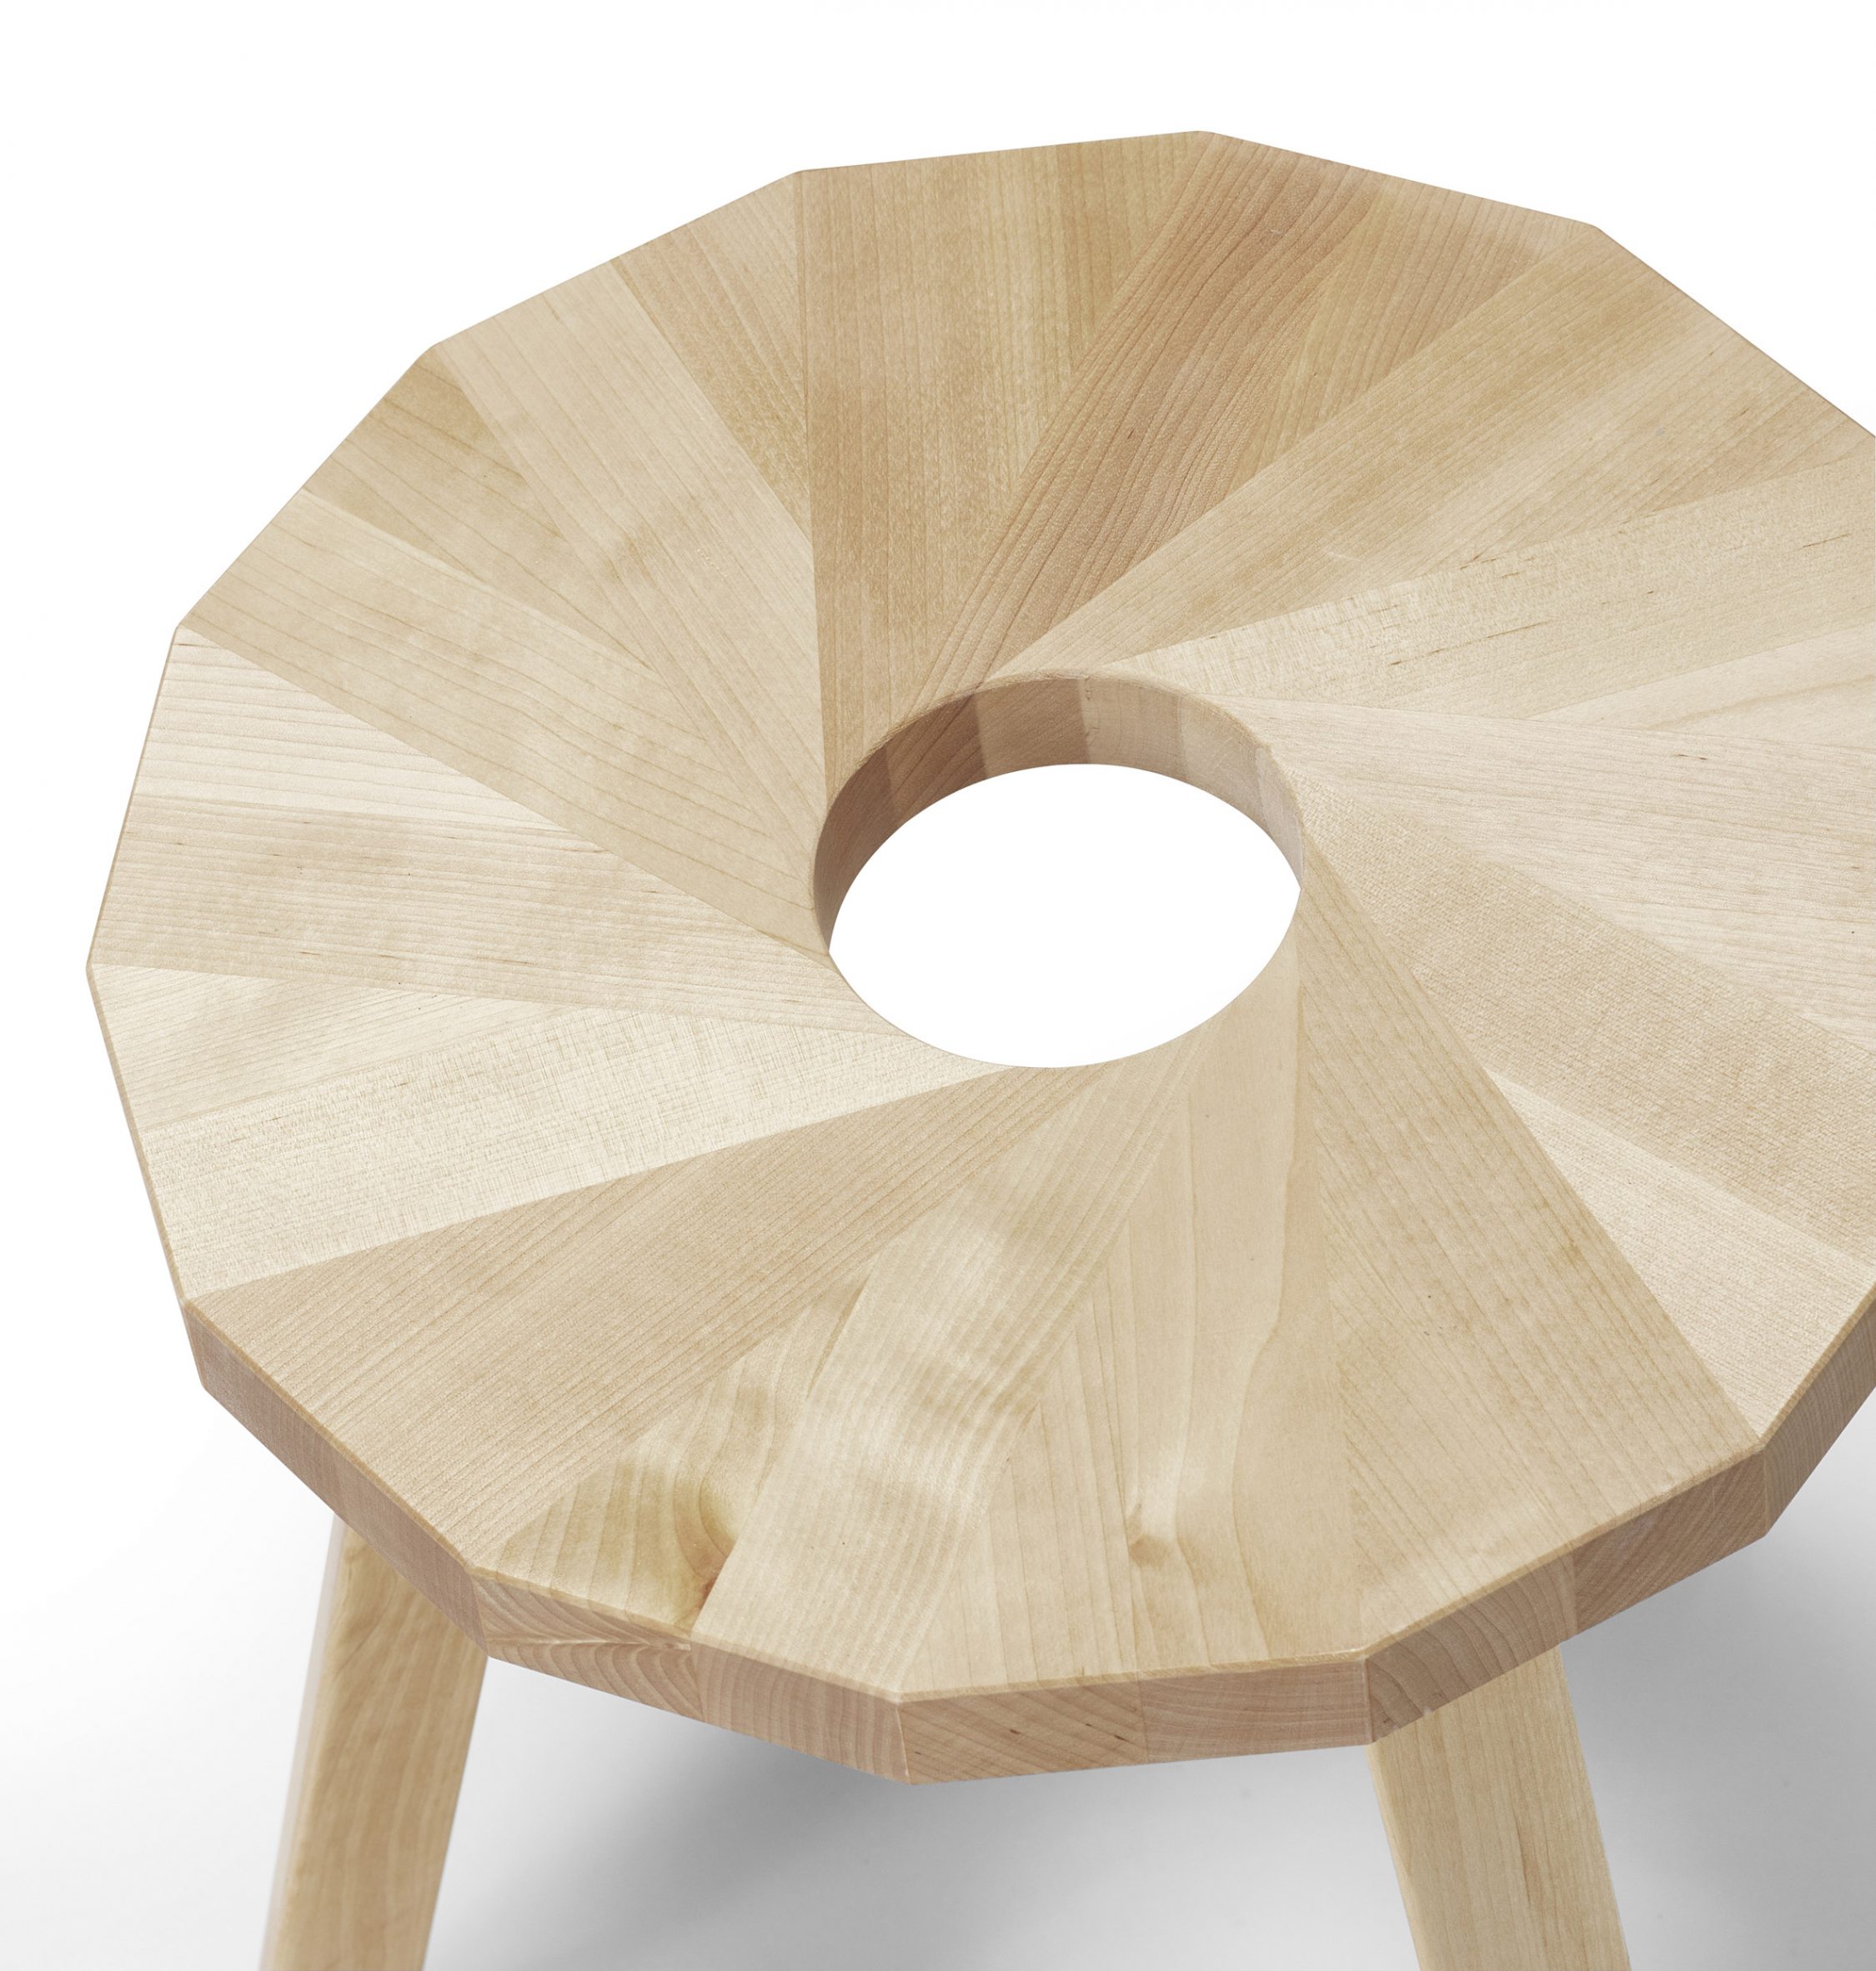 Close up of the Lilla Snåland stool's composition